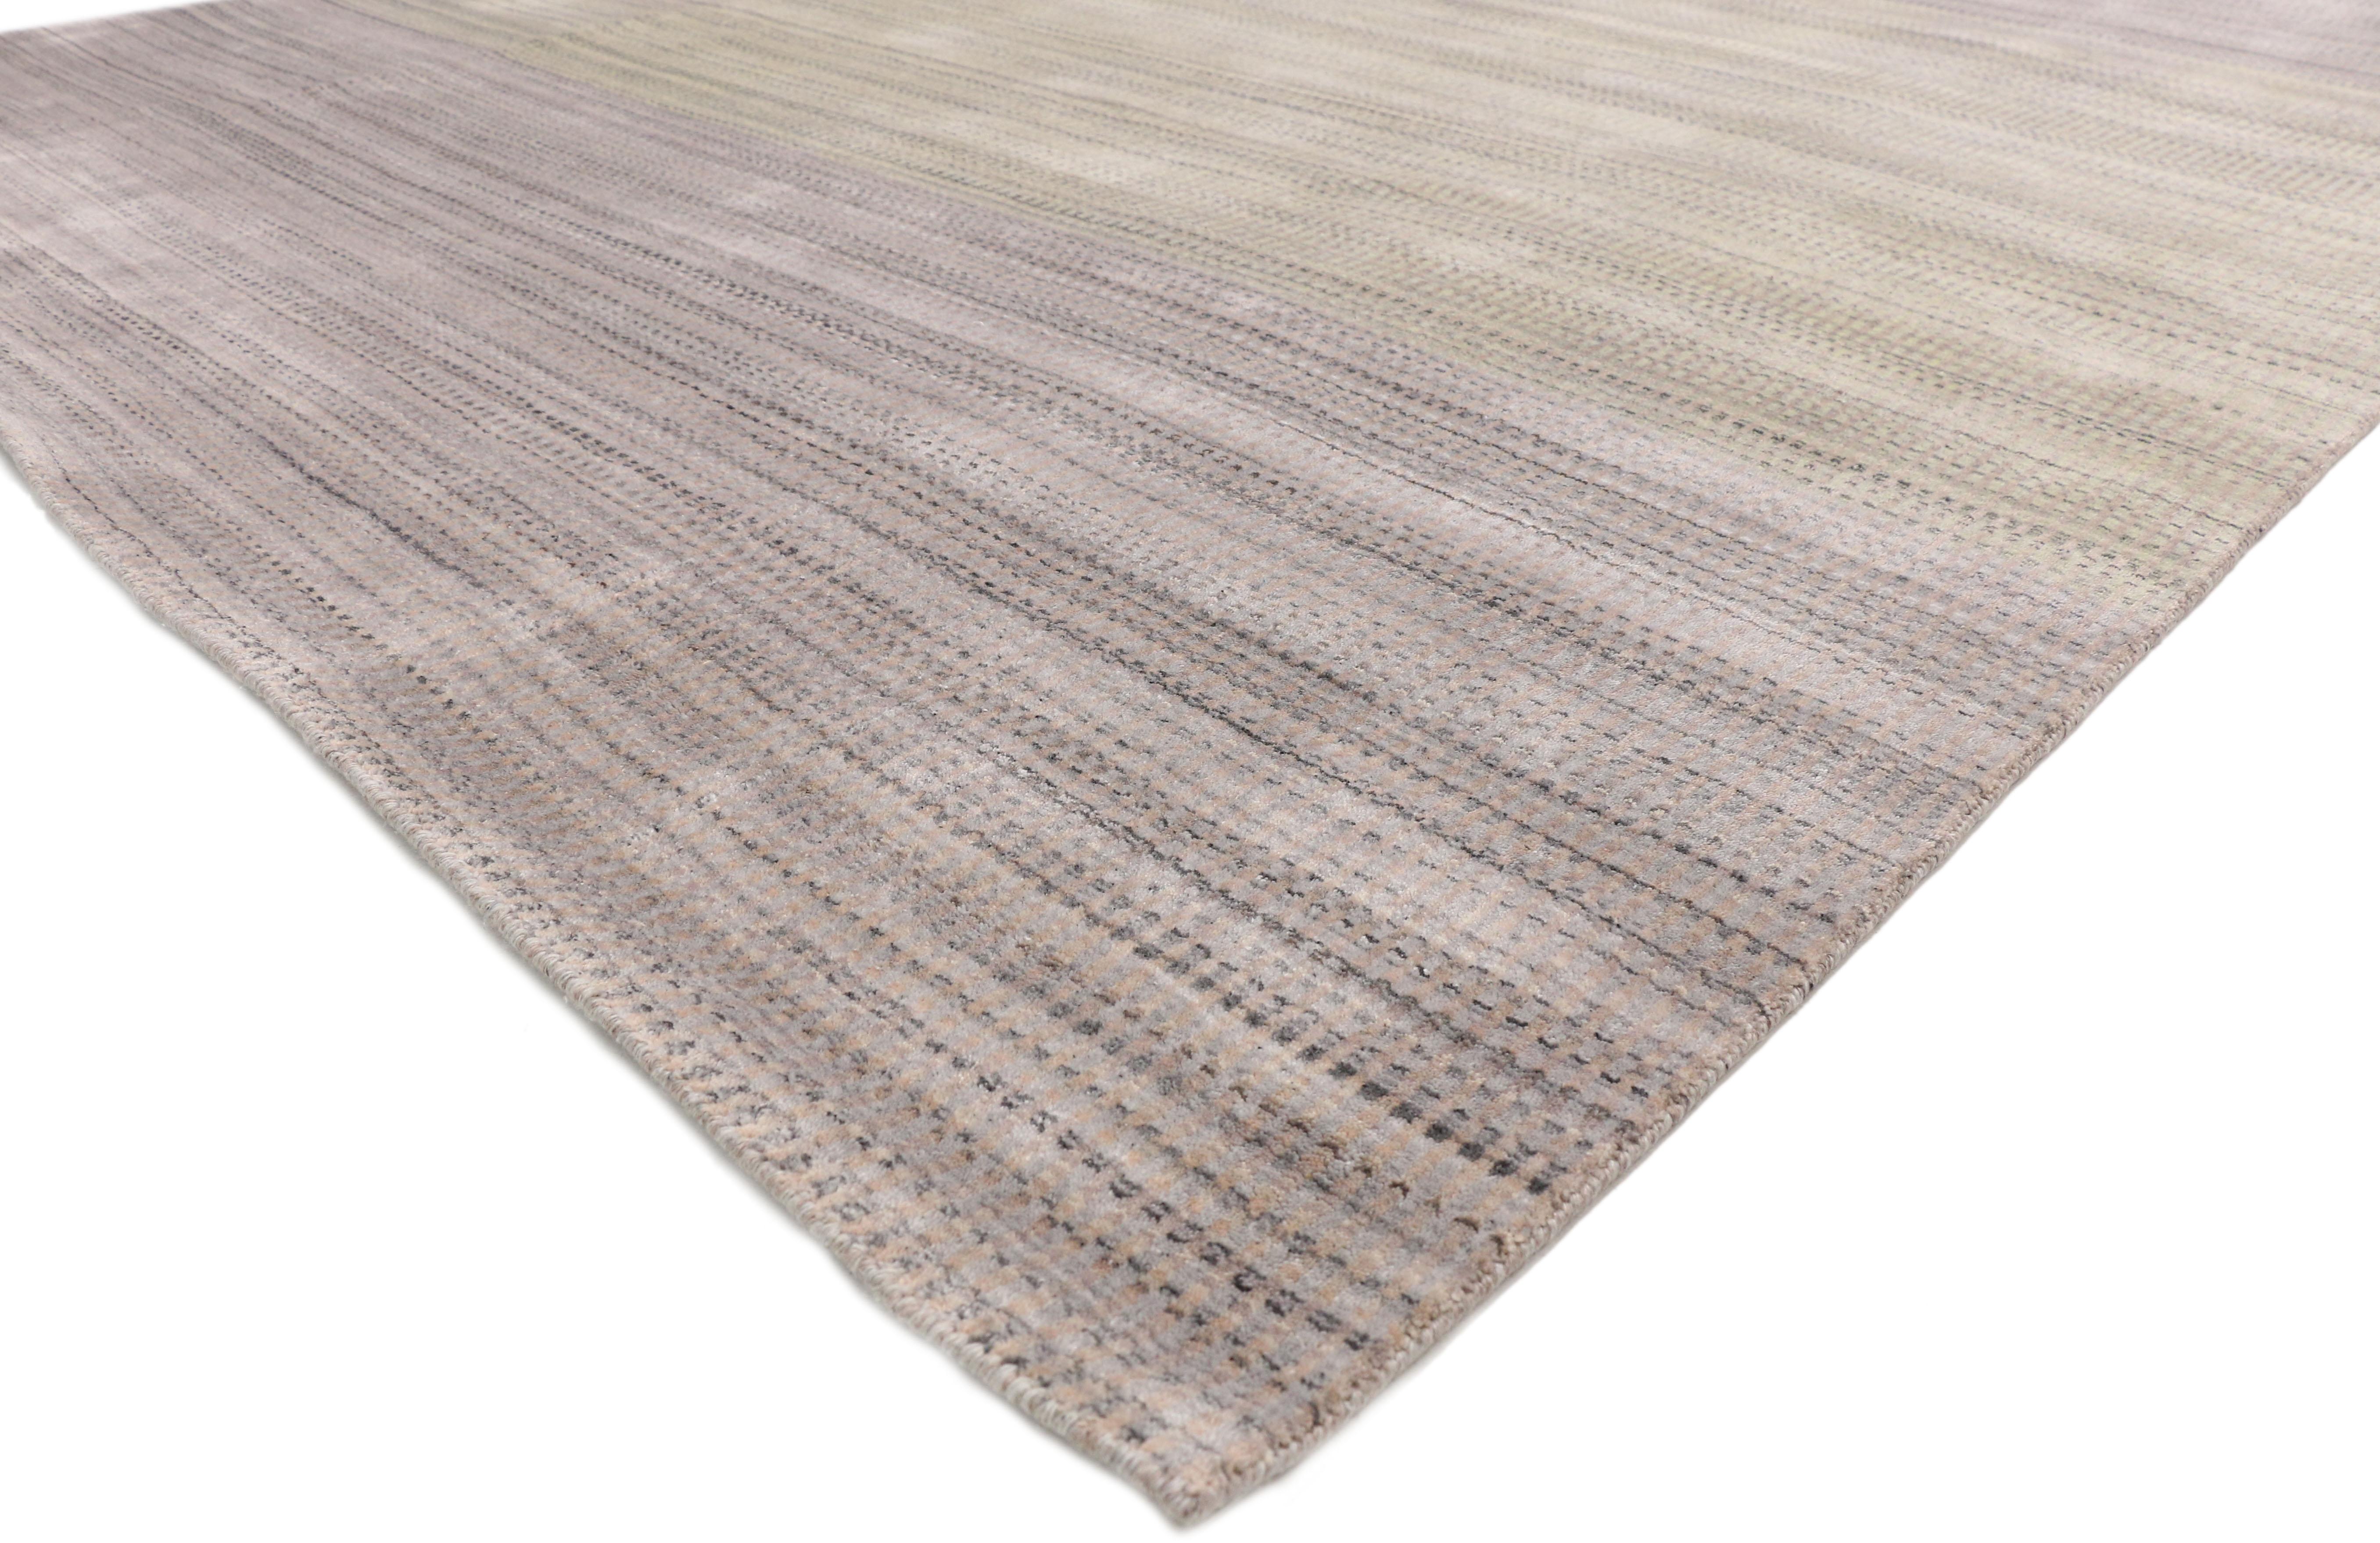 30448, new transitional Ombre area rug with French Country and Cottage style. Soft and sumptuous, this transitional ombre area rug with French Country cottage style transforms nearly any interior it graces into a heavenly retreat. The combination of